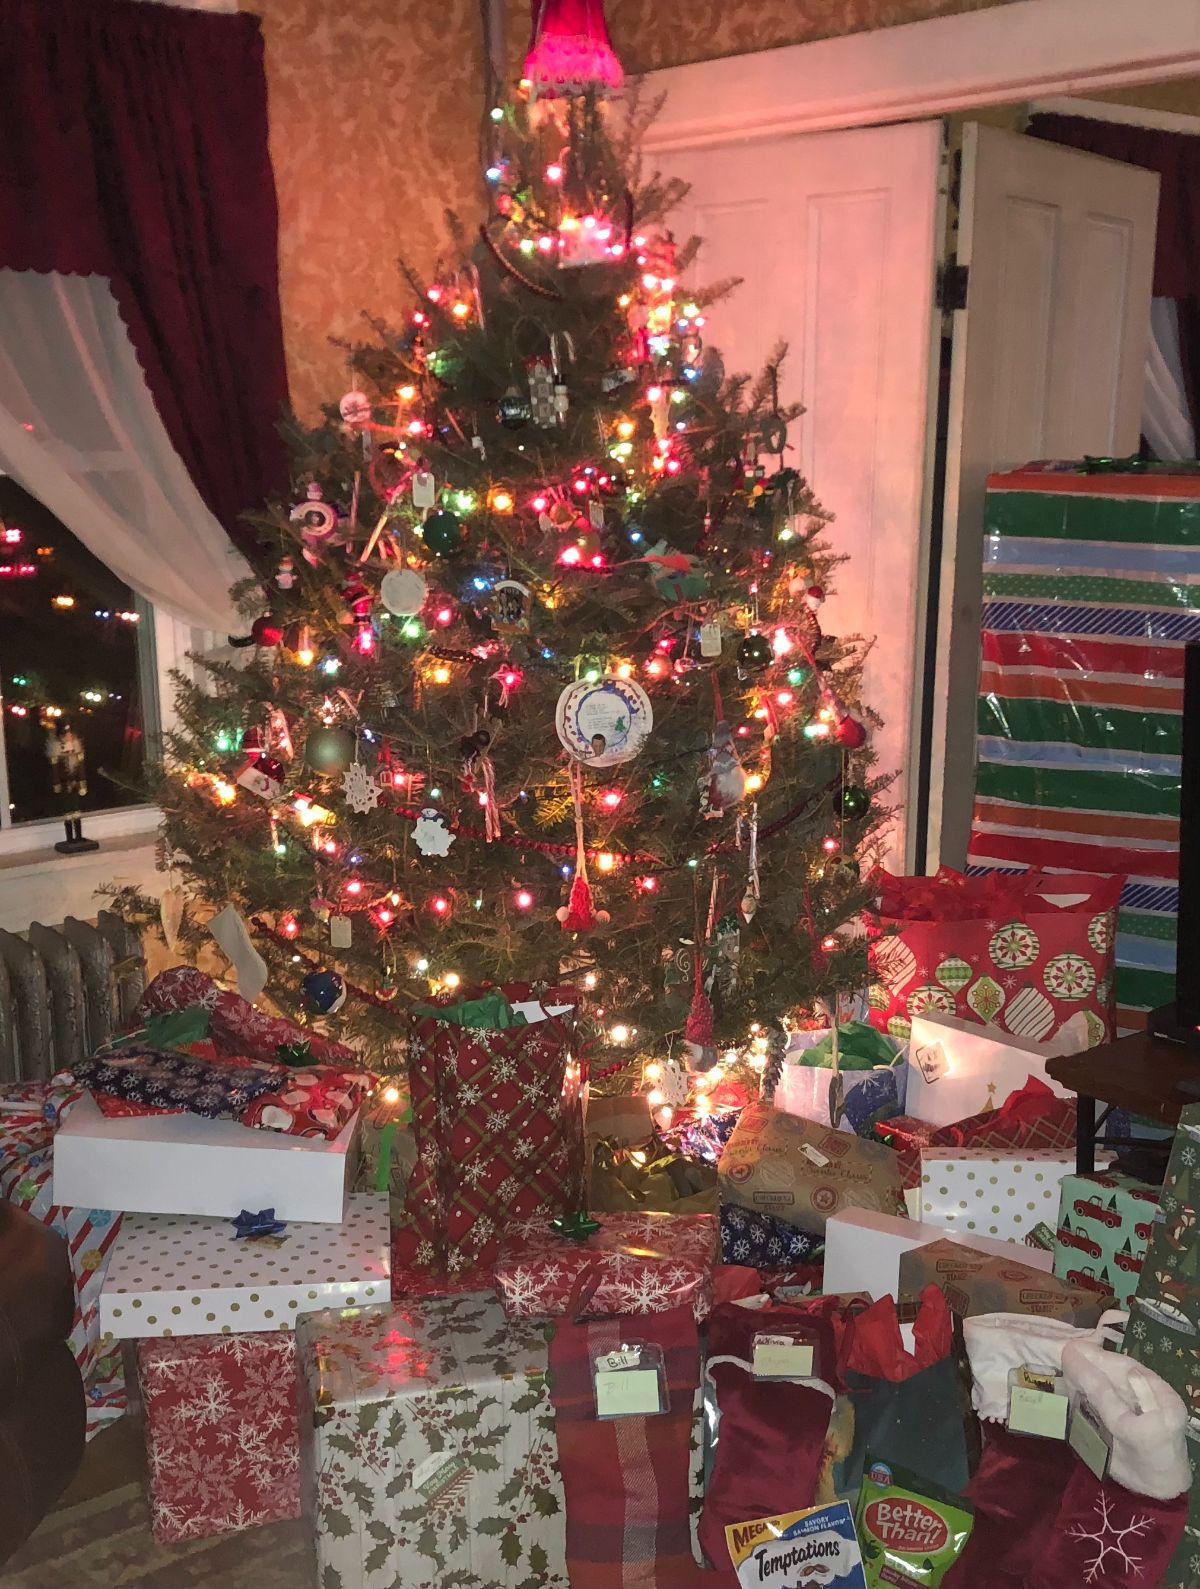 A Christmas tree surrounded by gifts